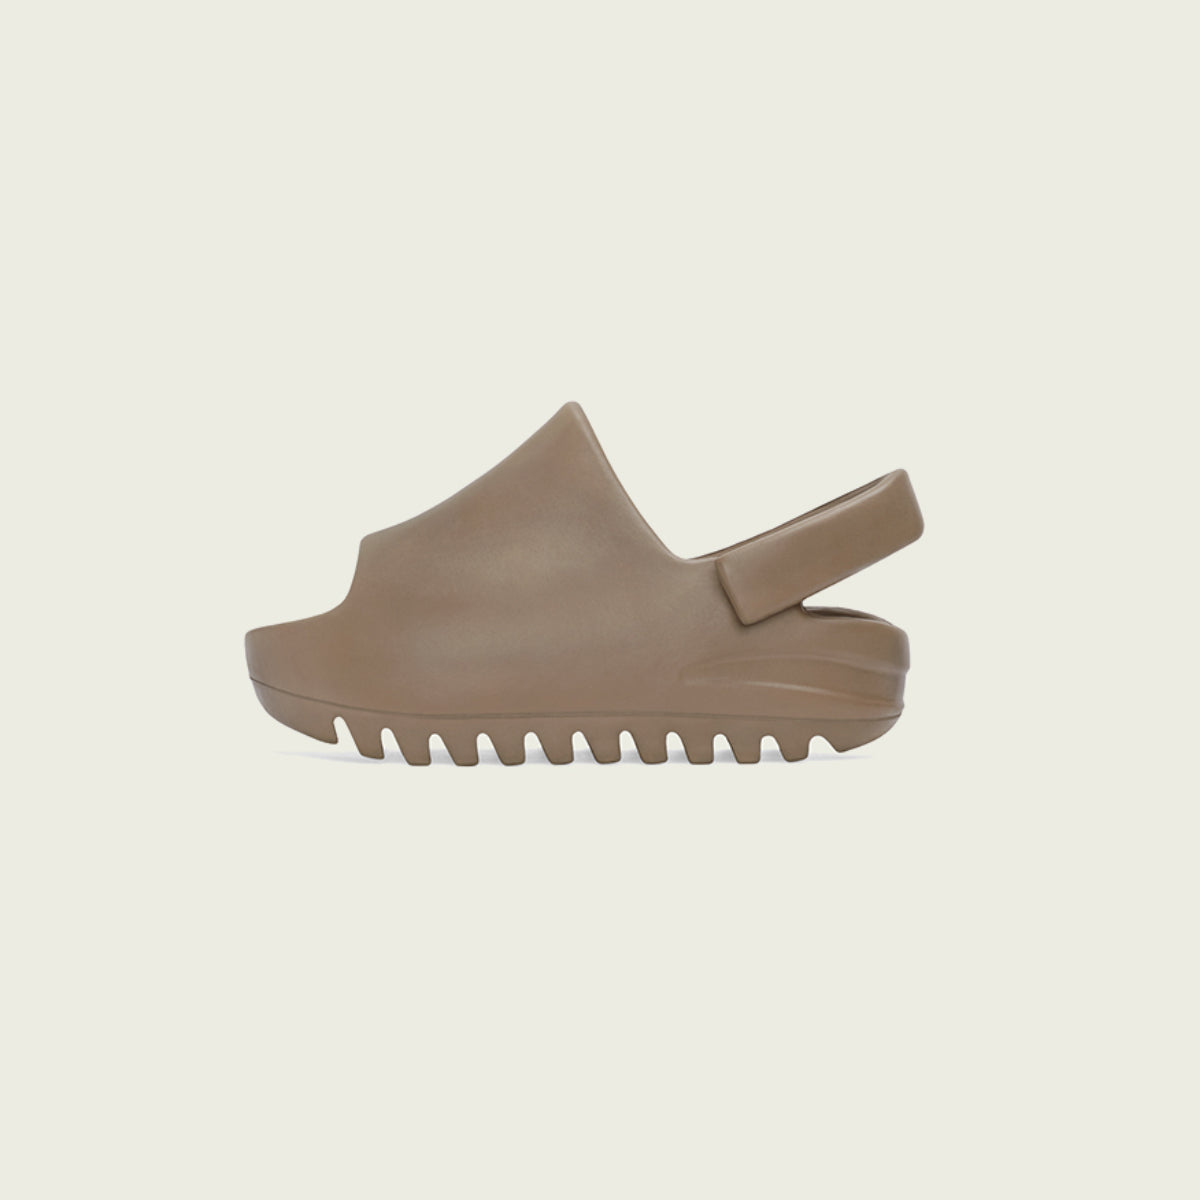 Yeezy Slide Resin Size 7 PREORDER FREE 2 DAY SHIPPING.